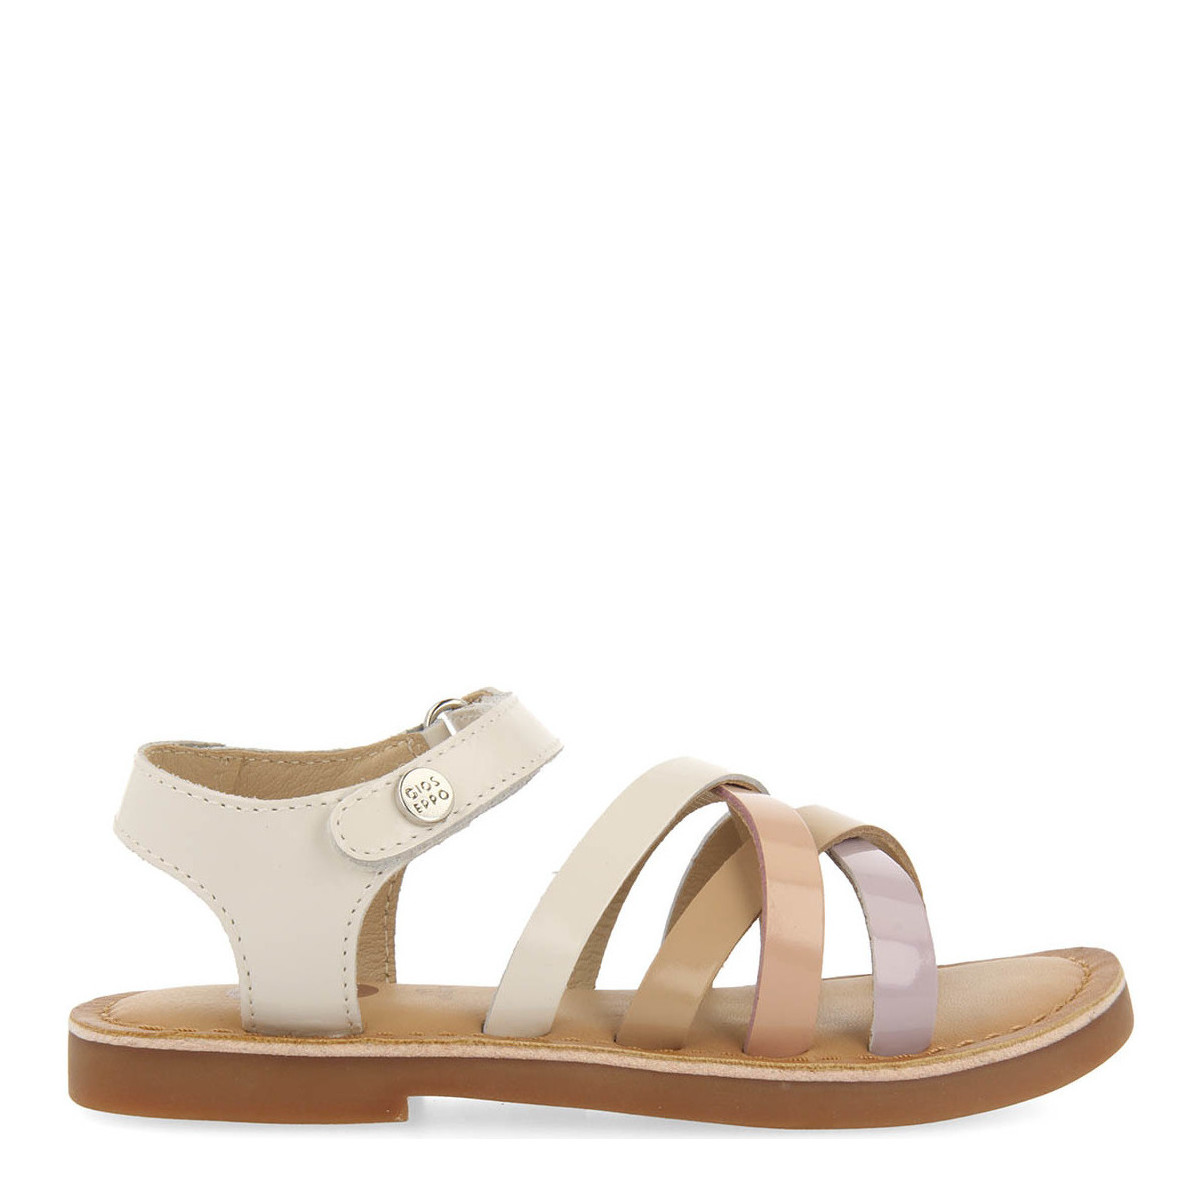 Chaussures Sandales et Nu-pieds Gioseppo ATYRA Blanc